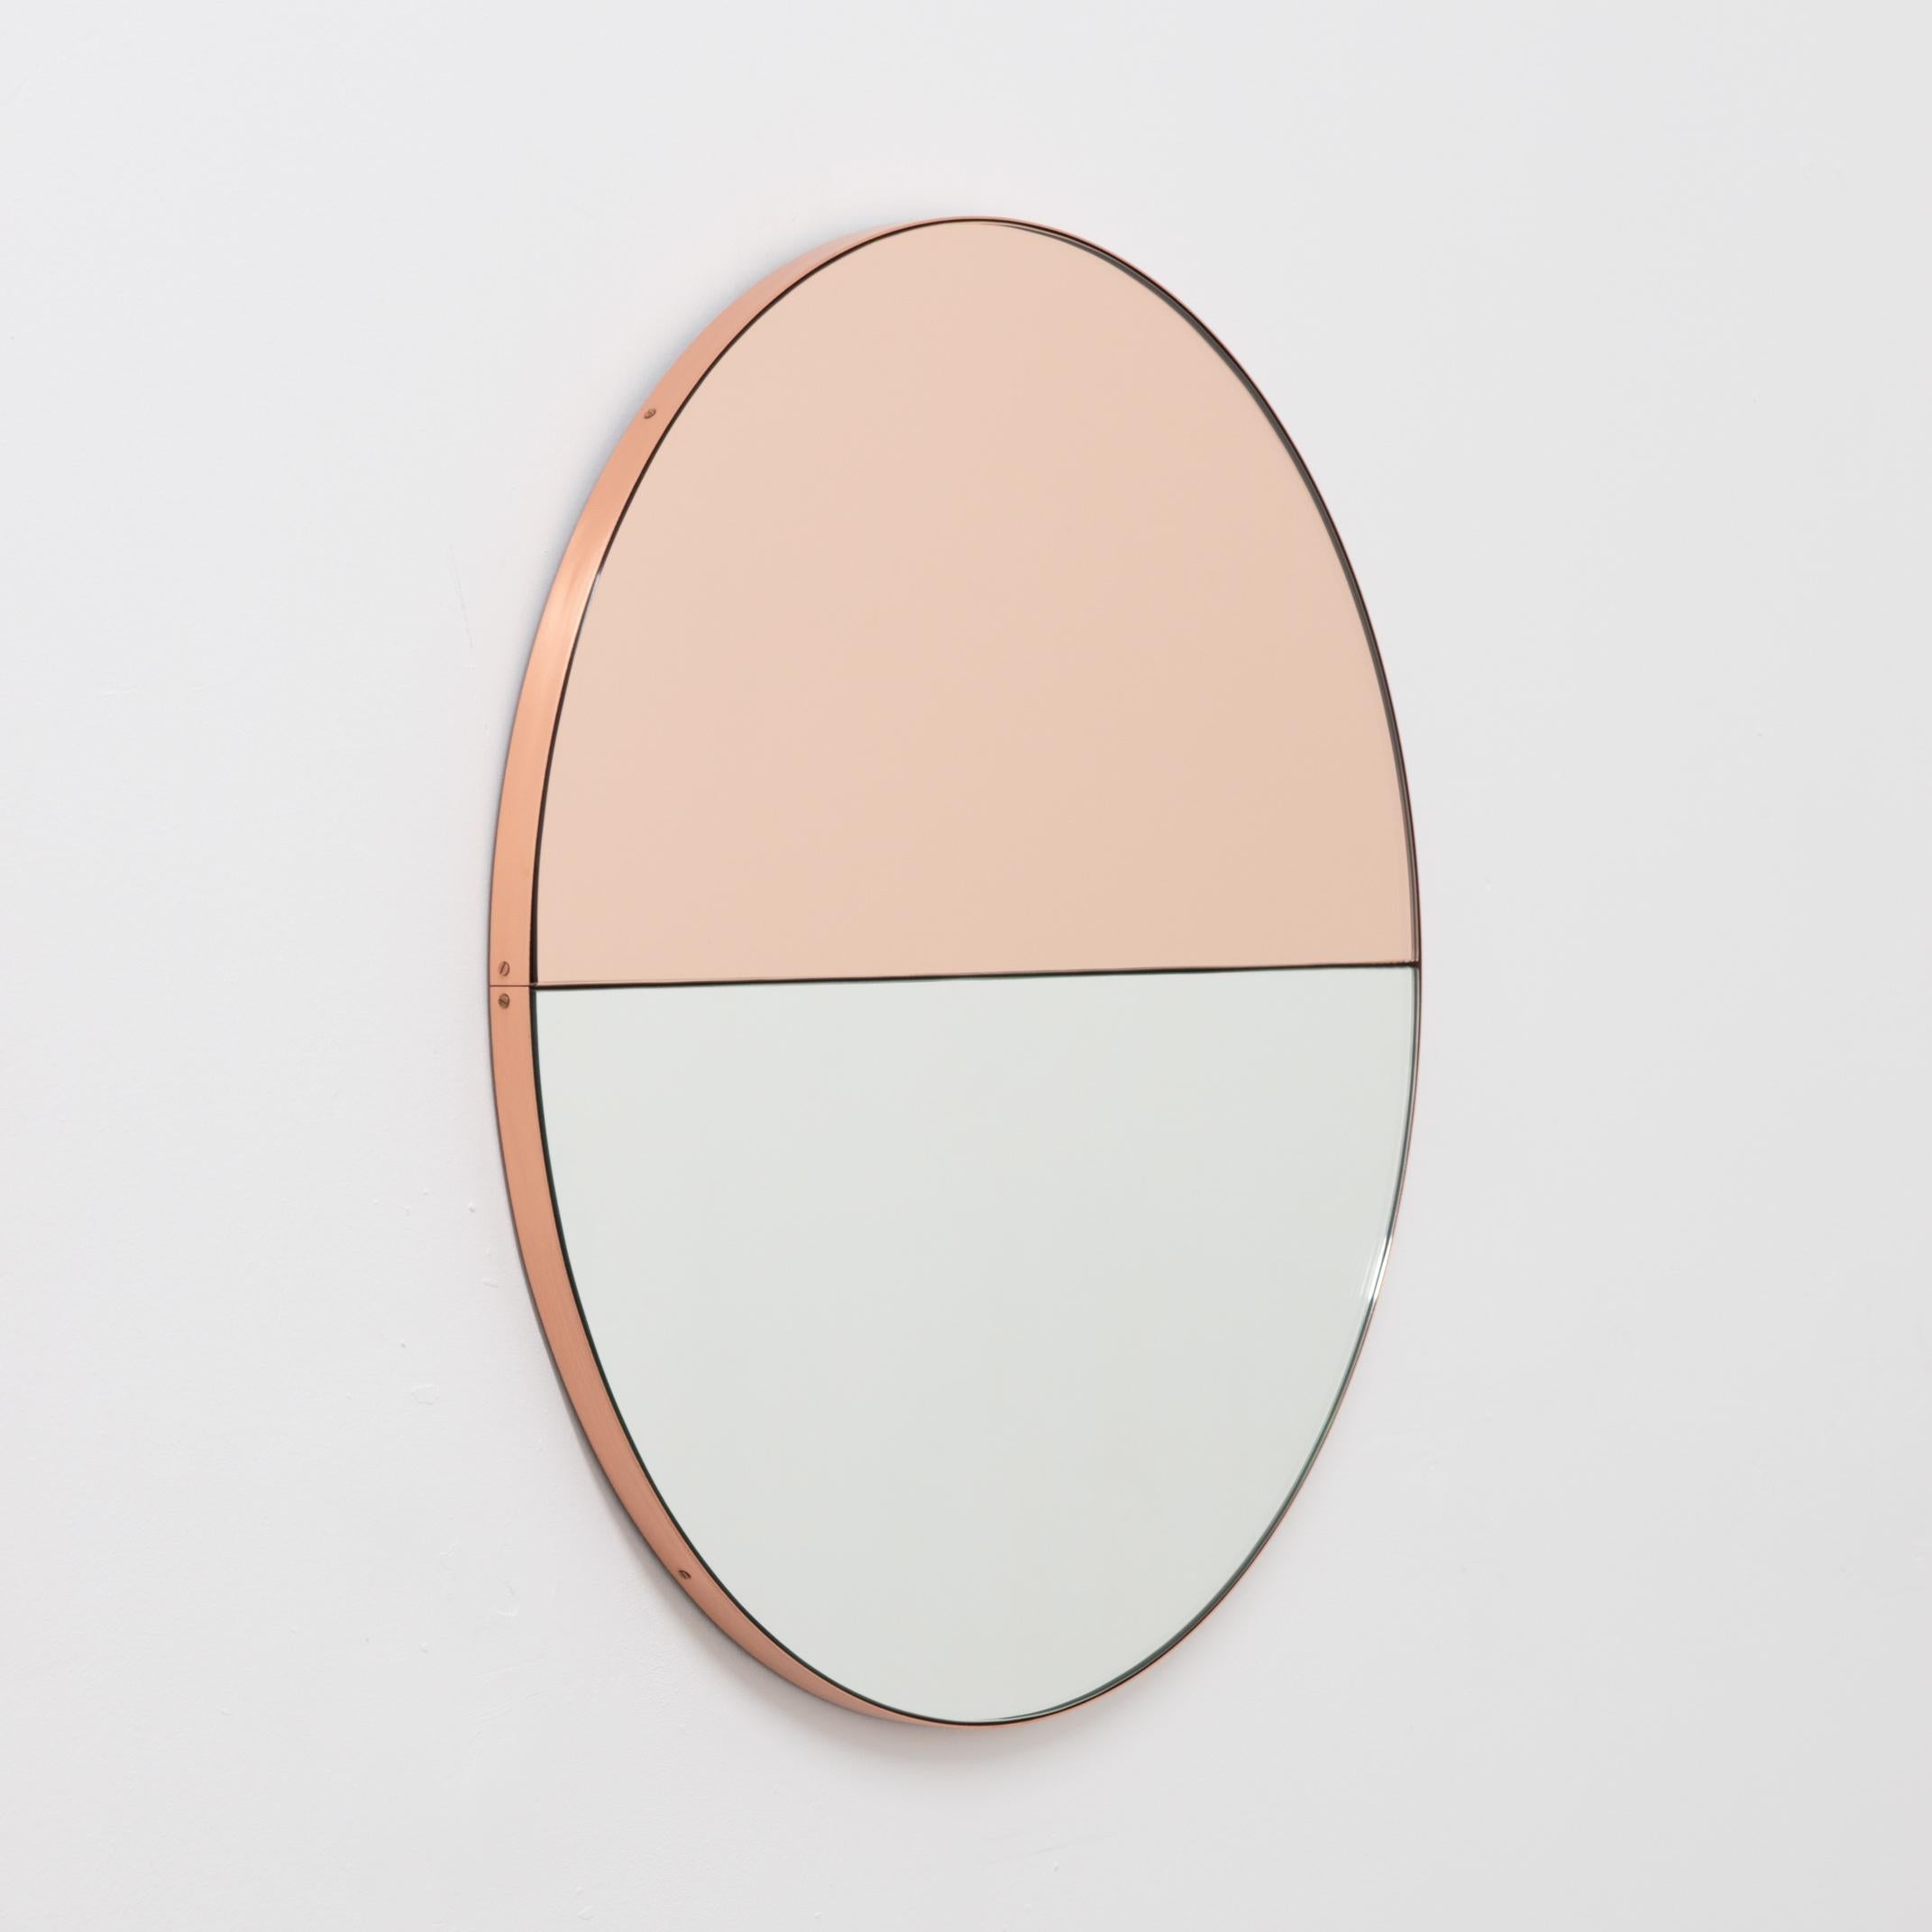 British Bespoke Listing for Aurore Orbis dualis Rose gold+silver Brushed brass frame 